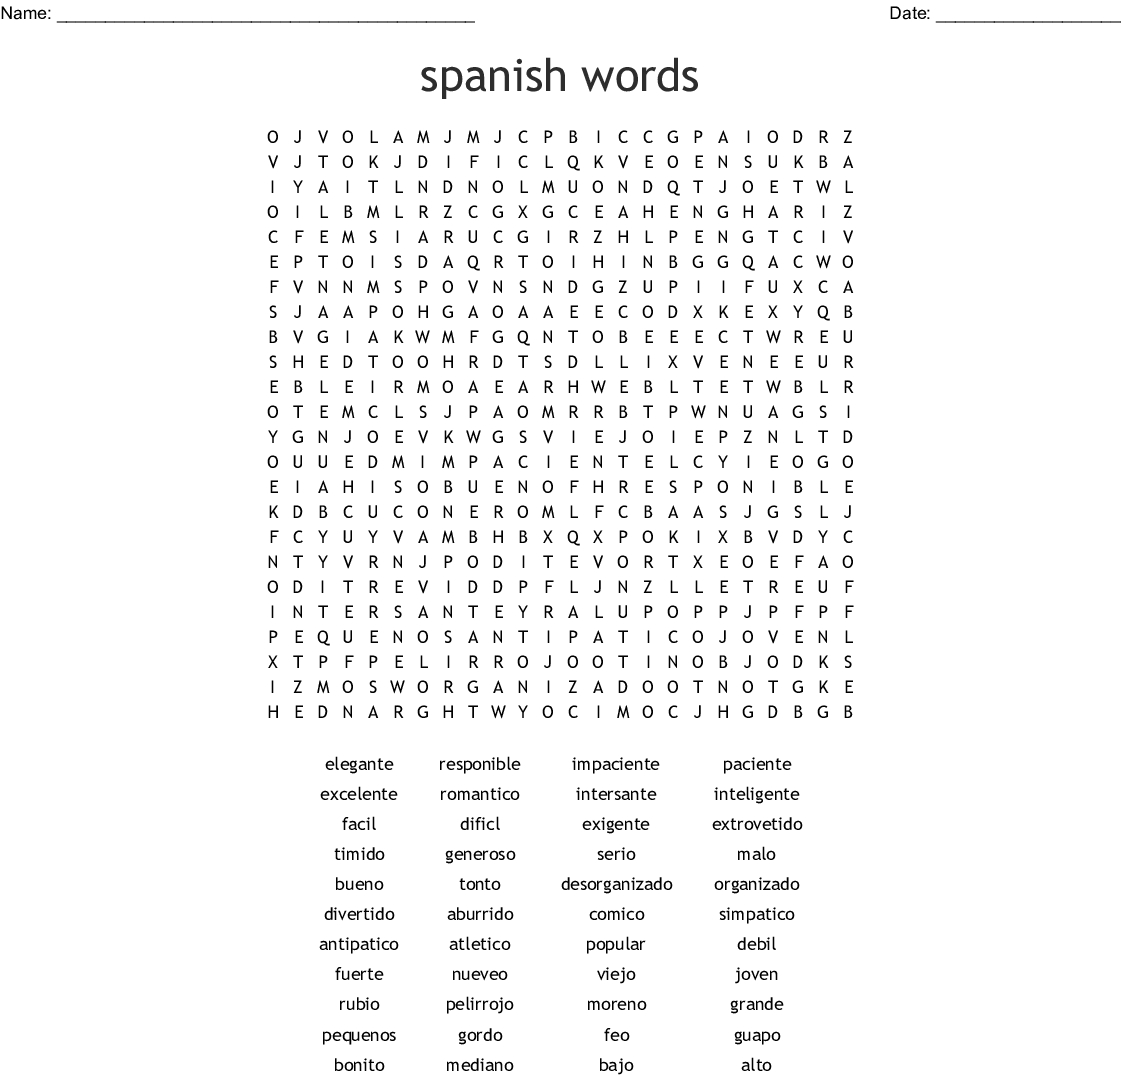 Spanish Words Word Search - Wordmint